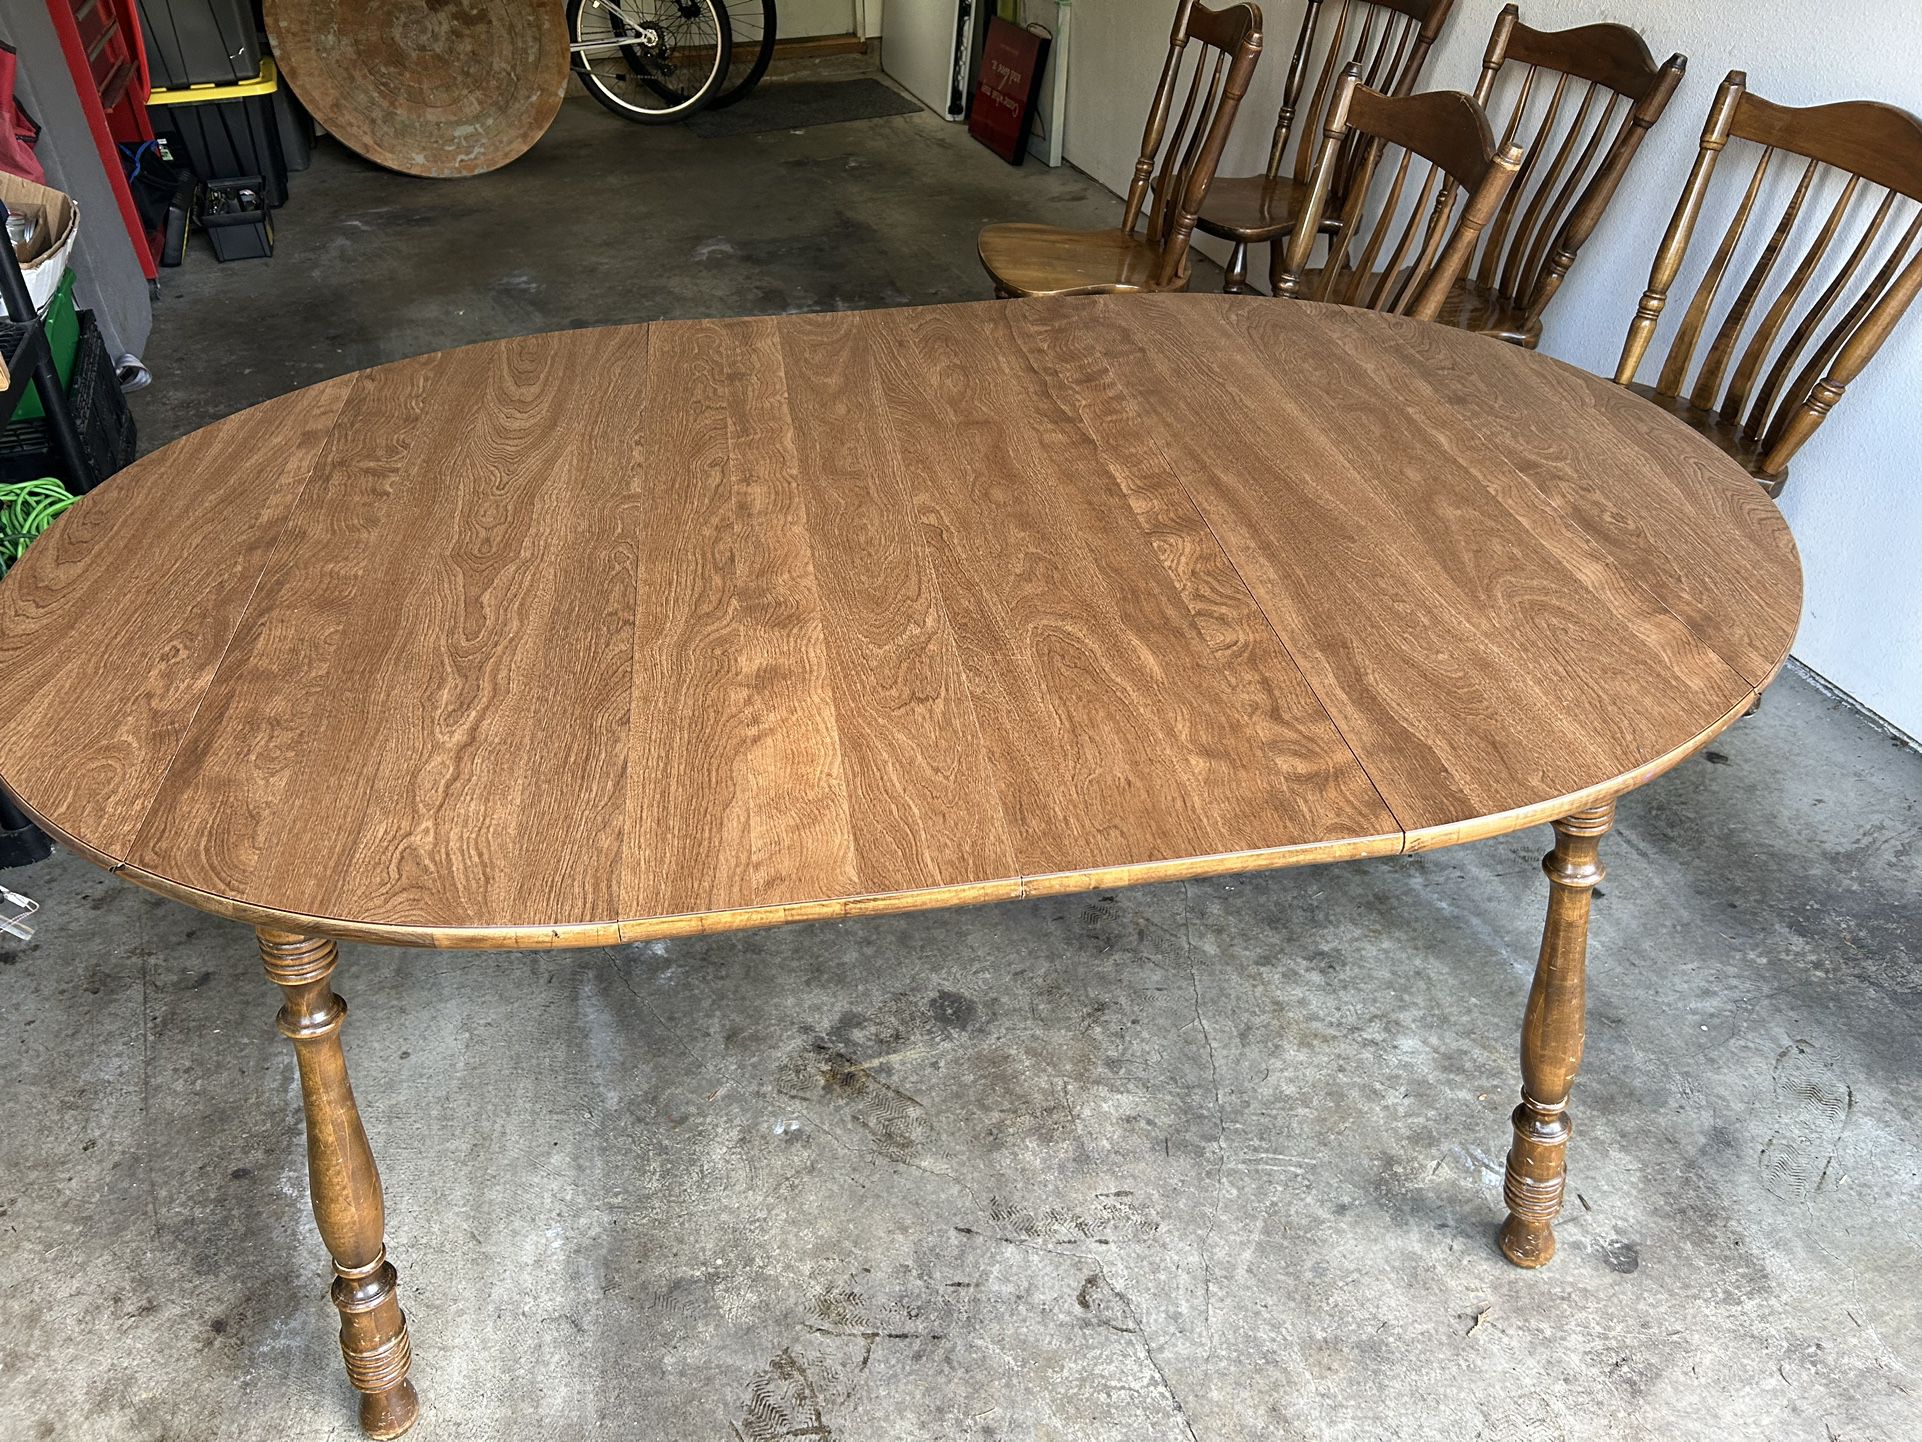 Maple Dining Table & Chairs 